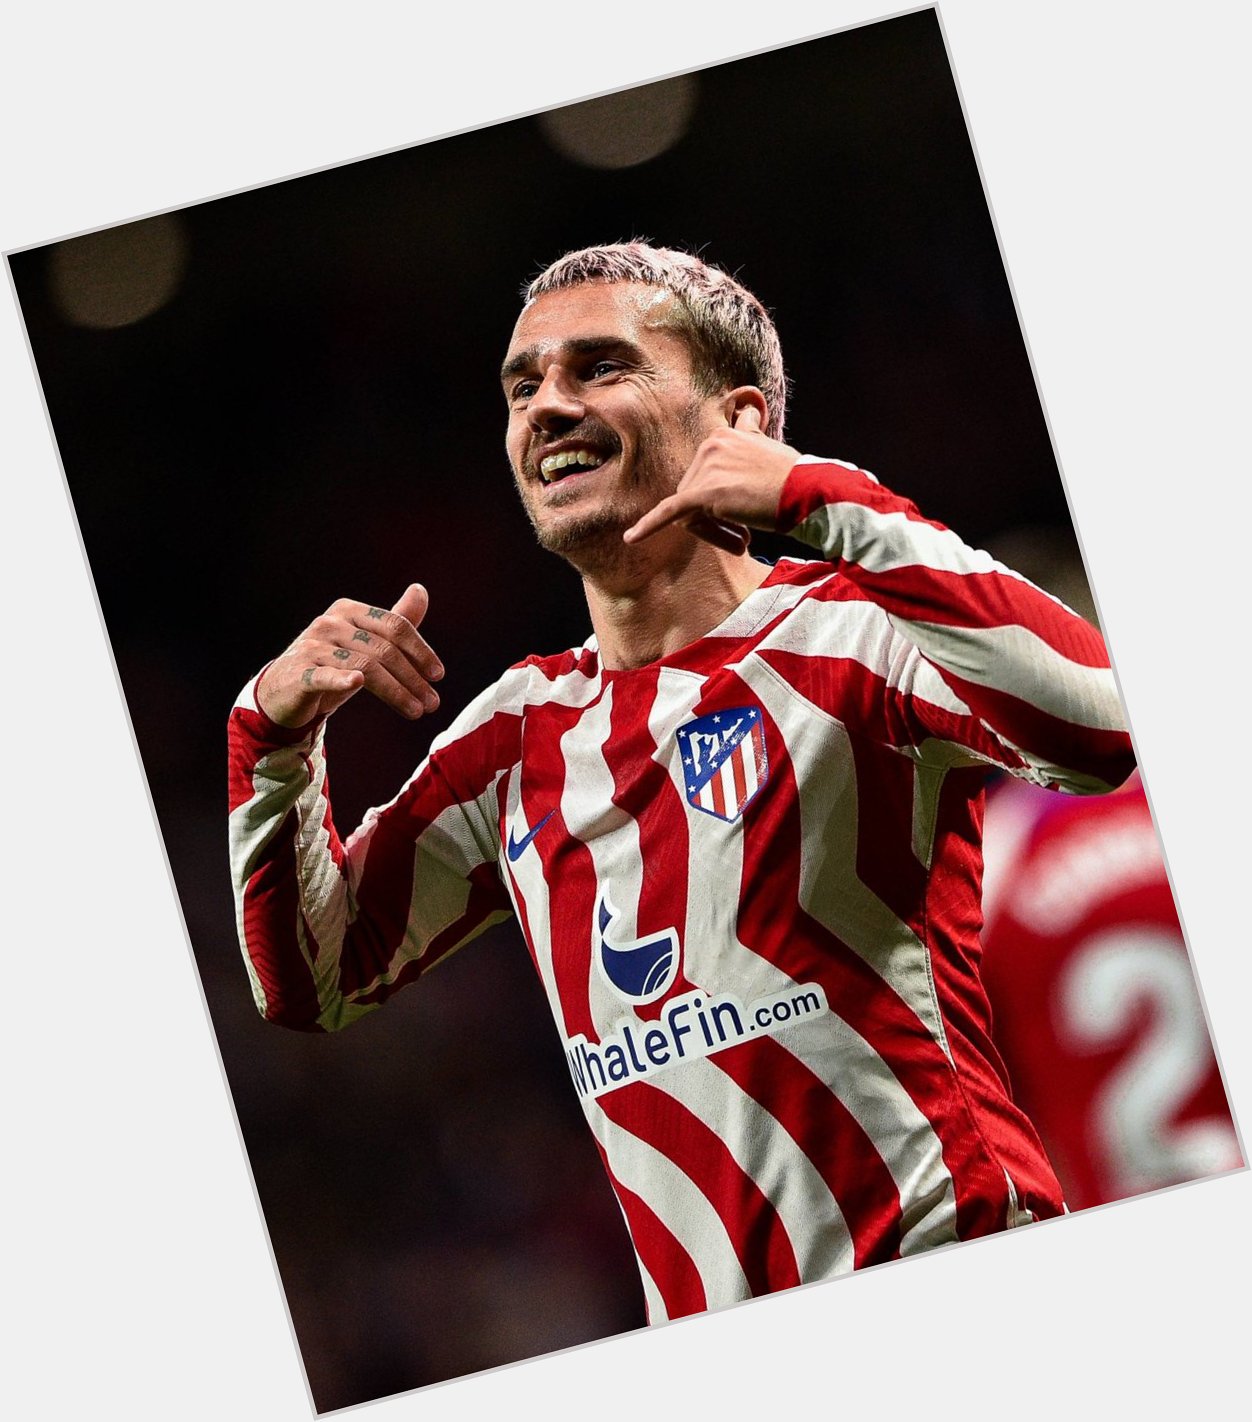 One of the most stylish and exciting players of this generation. 

Happy Birthday, Antoine Griezmann   